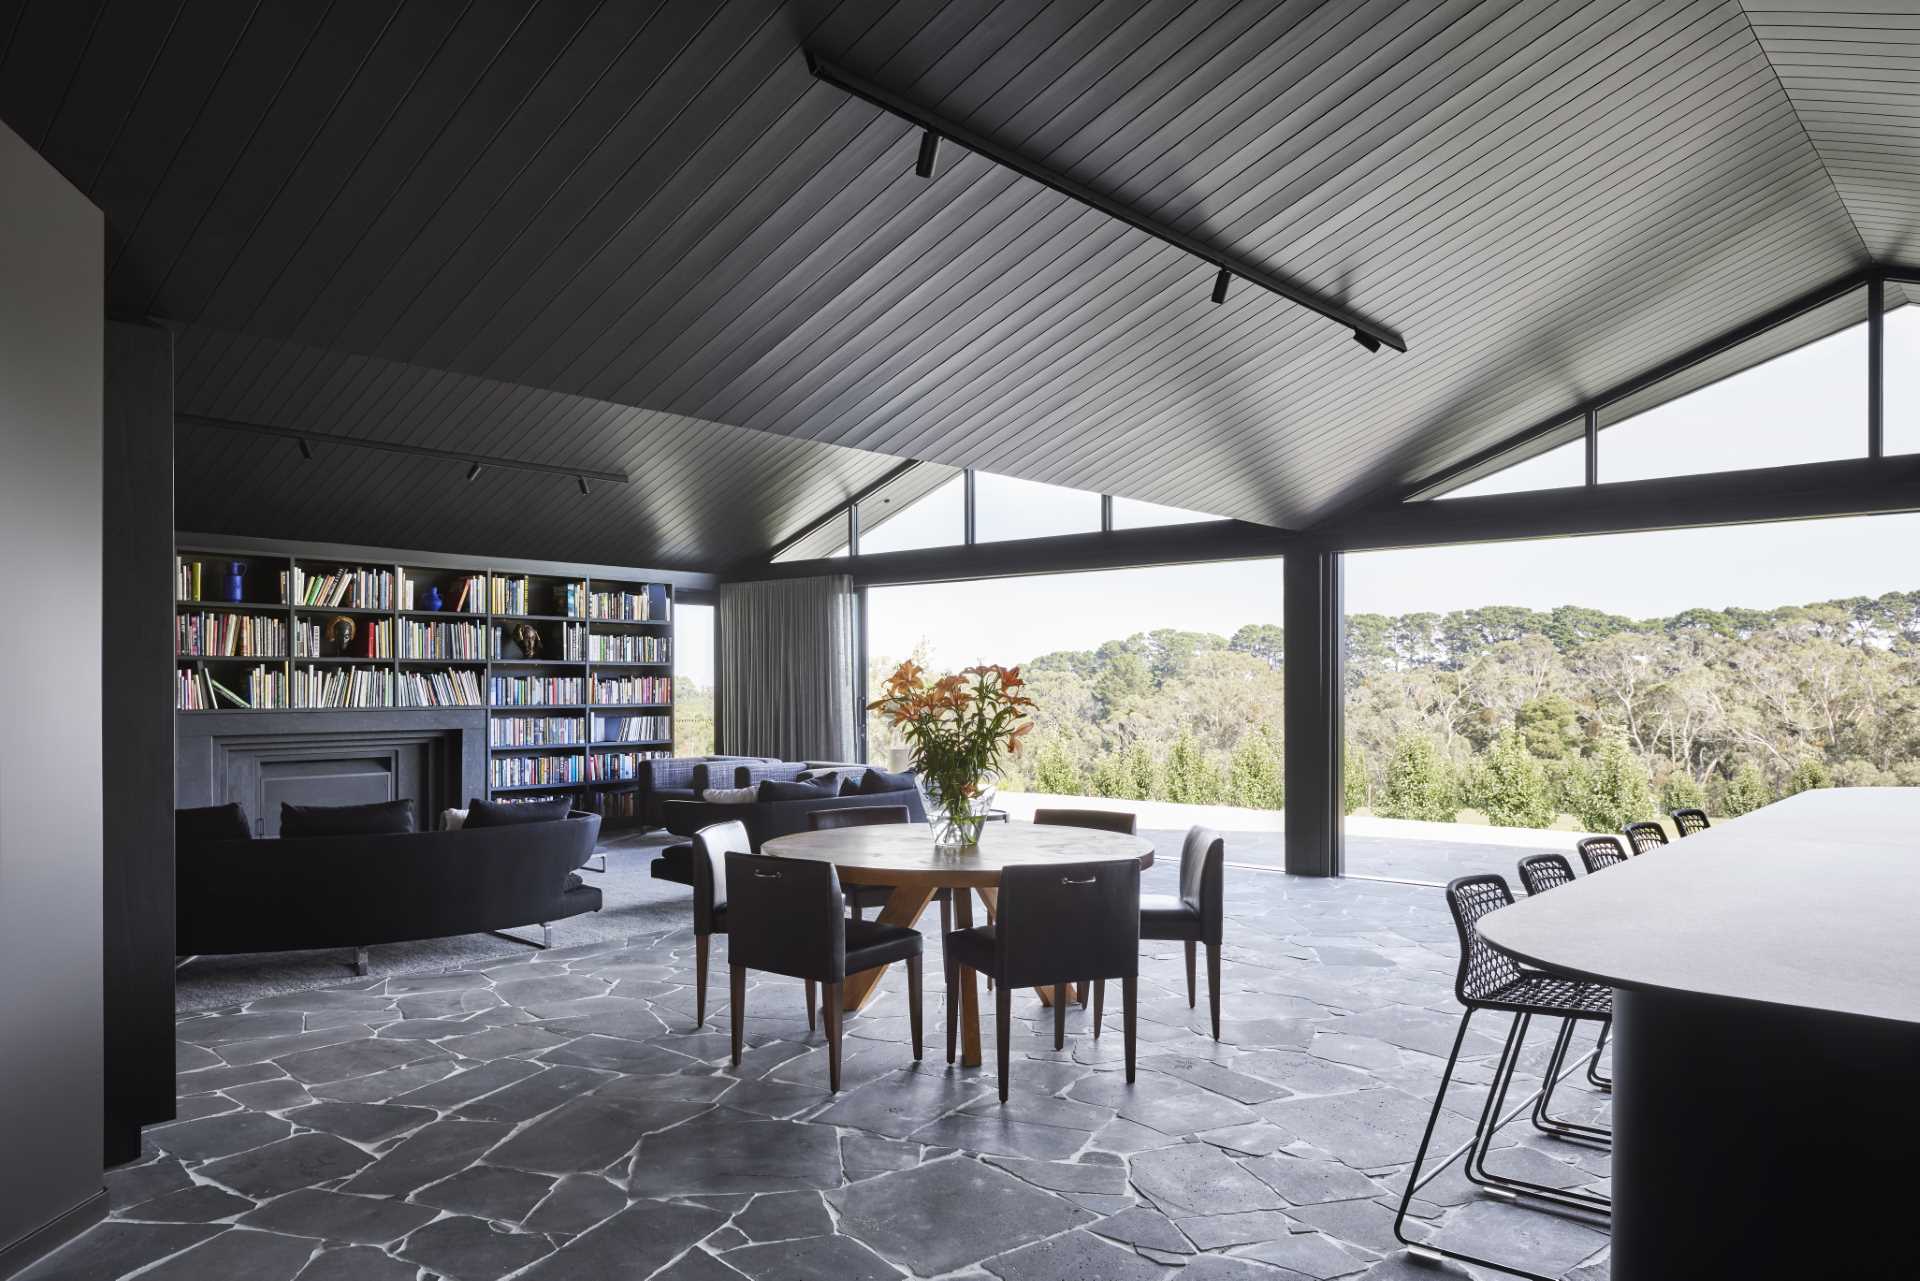 A modern farmhouse dining area with bluestone crazy paving flooring throughout.